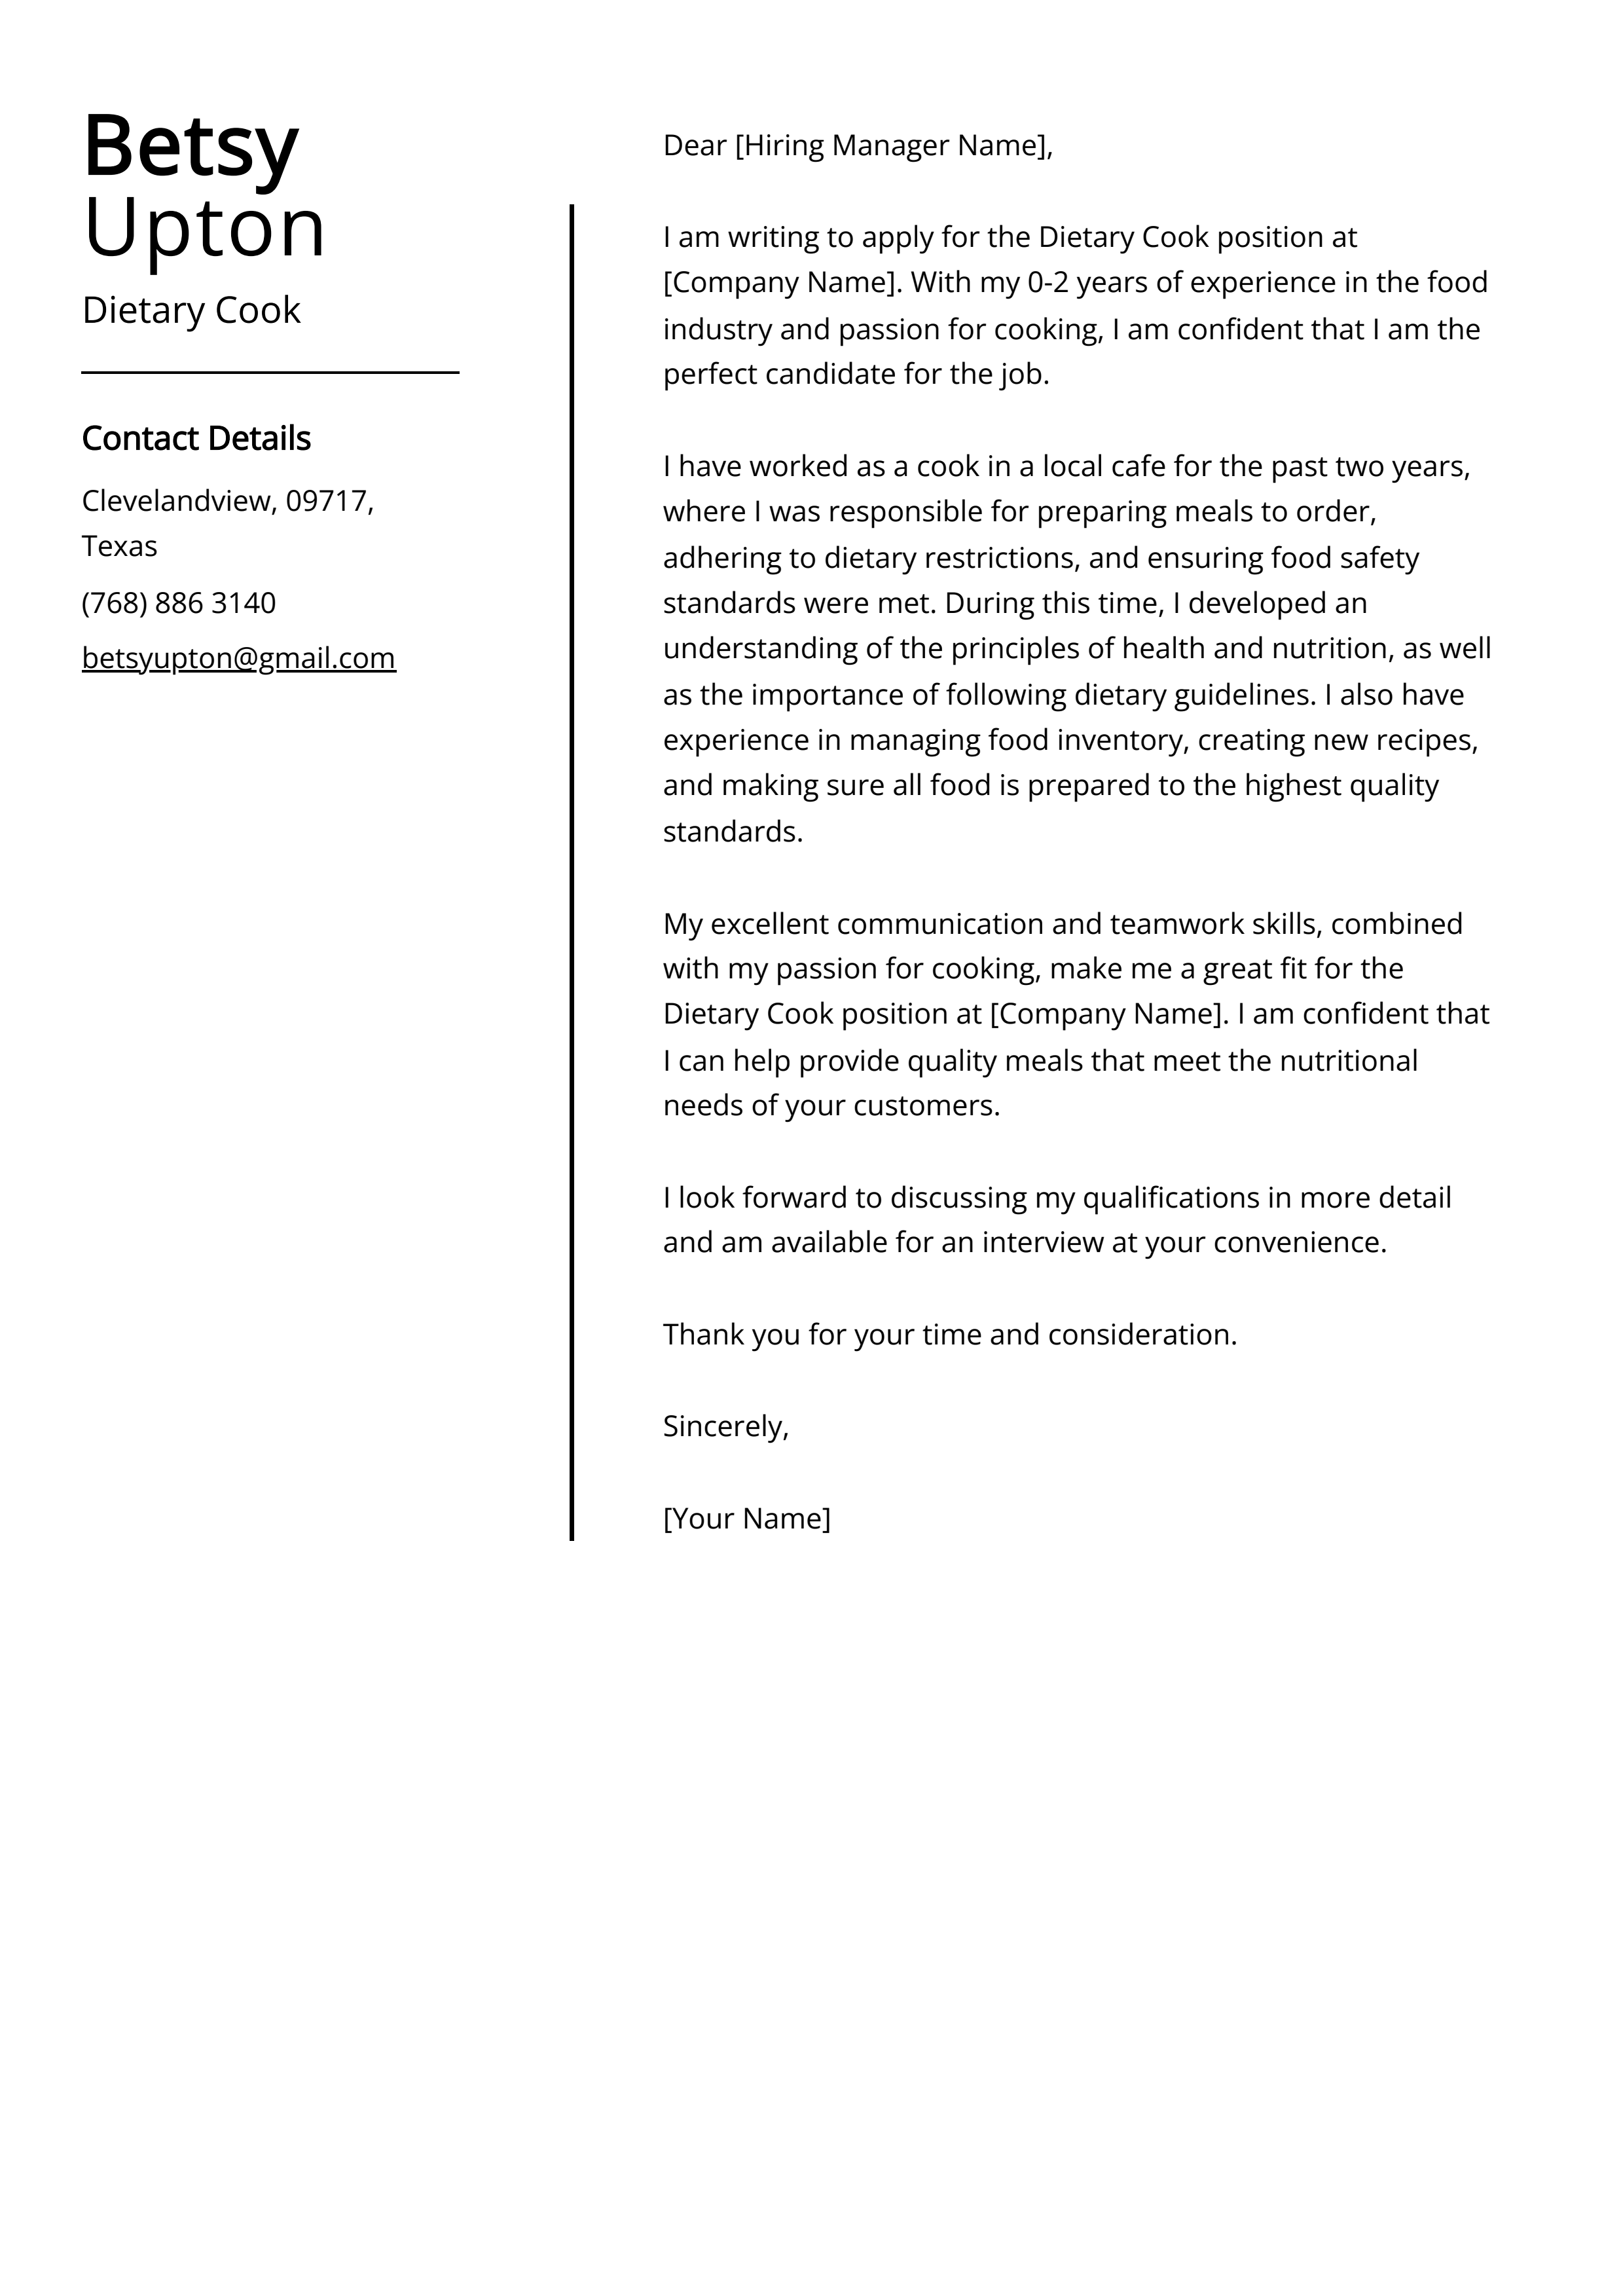 Dietary Cook Cover Letter Example